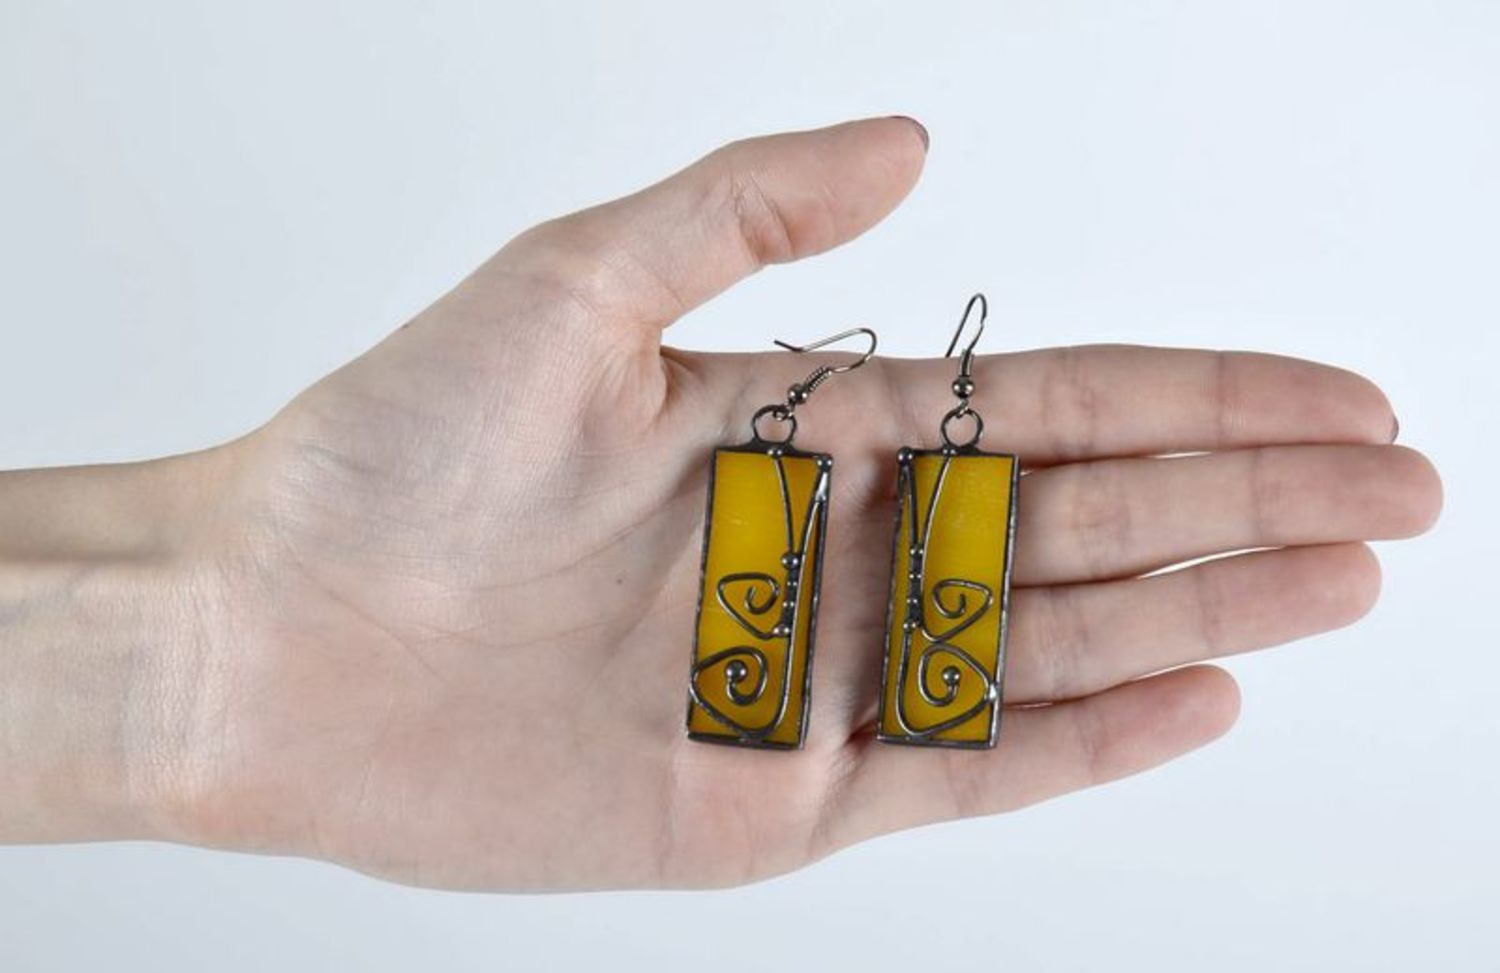 Stained glass earrings made of copper and glass photo 5